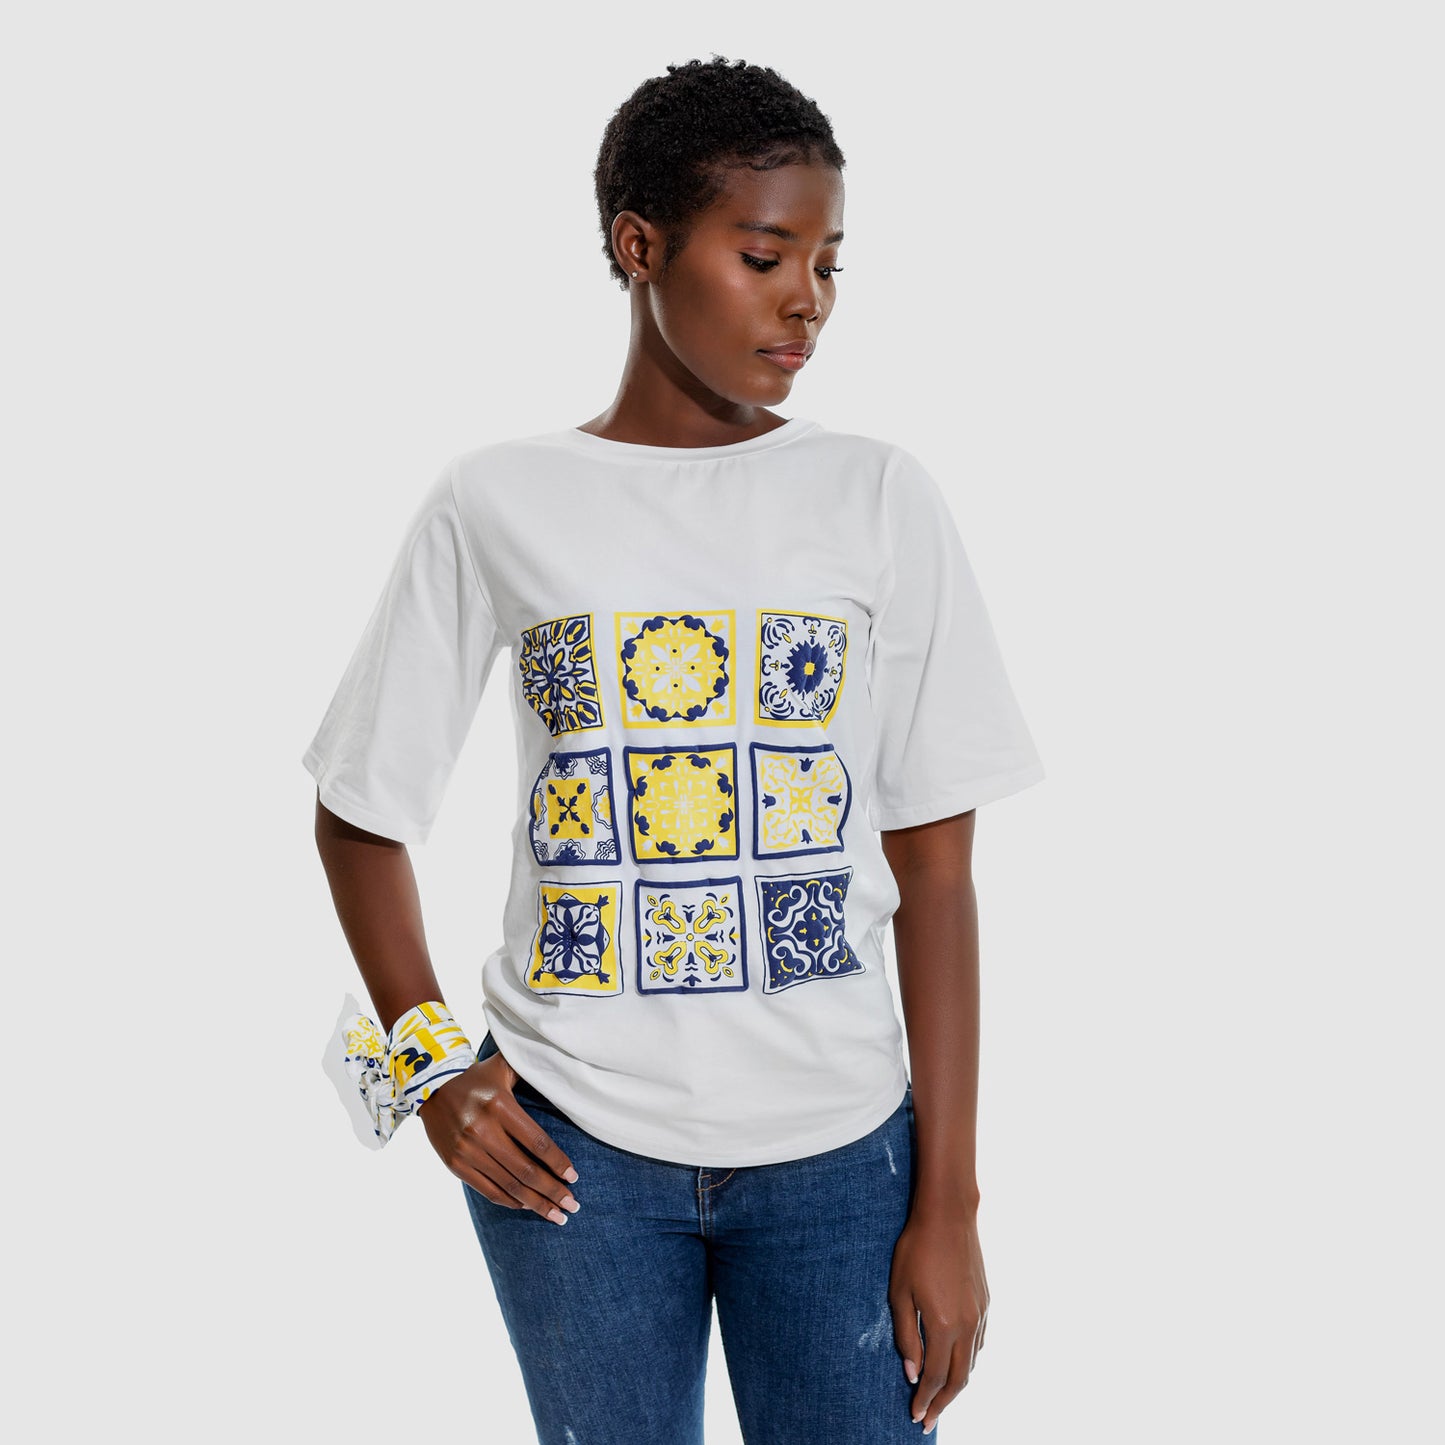 Mudejar tiles, white T-shirt, Tee, screen printing, lose tee, relaxed fit, beautiful shirt, woman, blue and yellow print